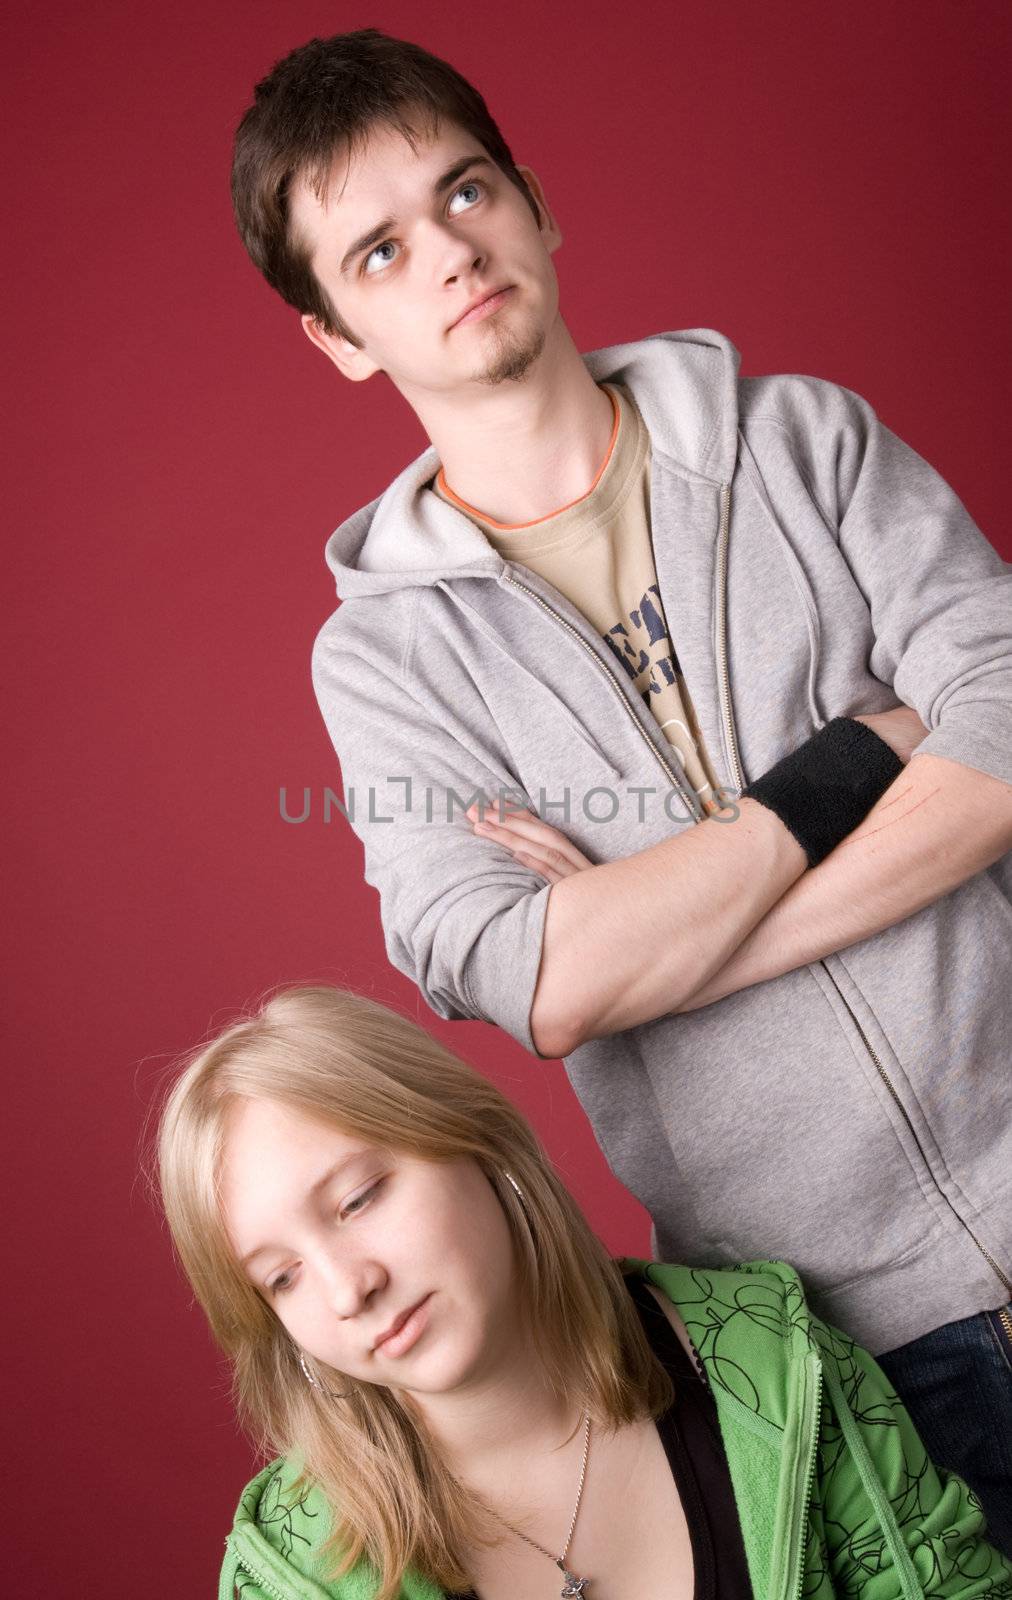 The young girl and the guy on a red background.